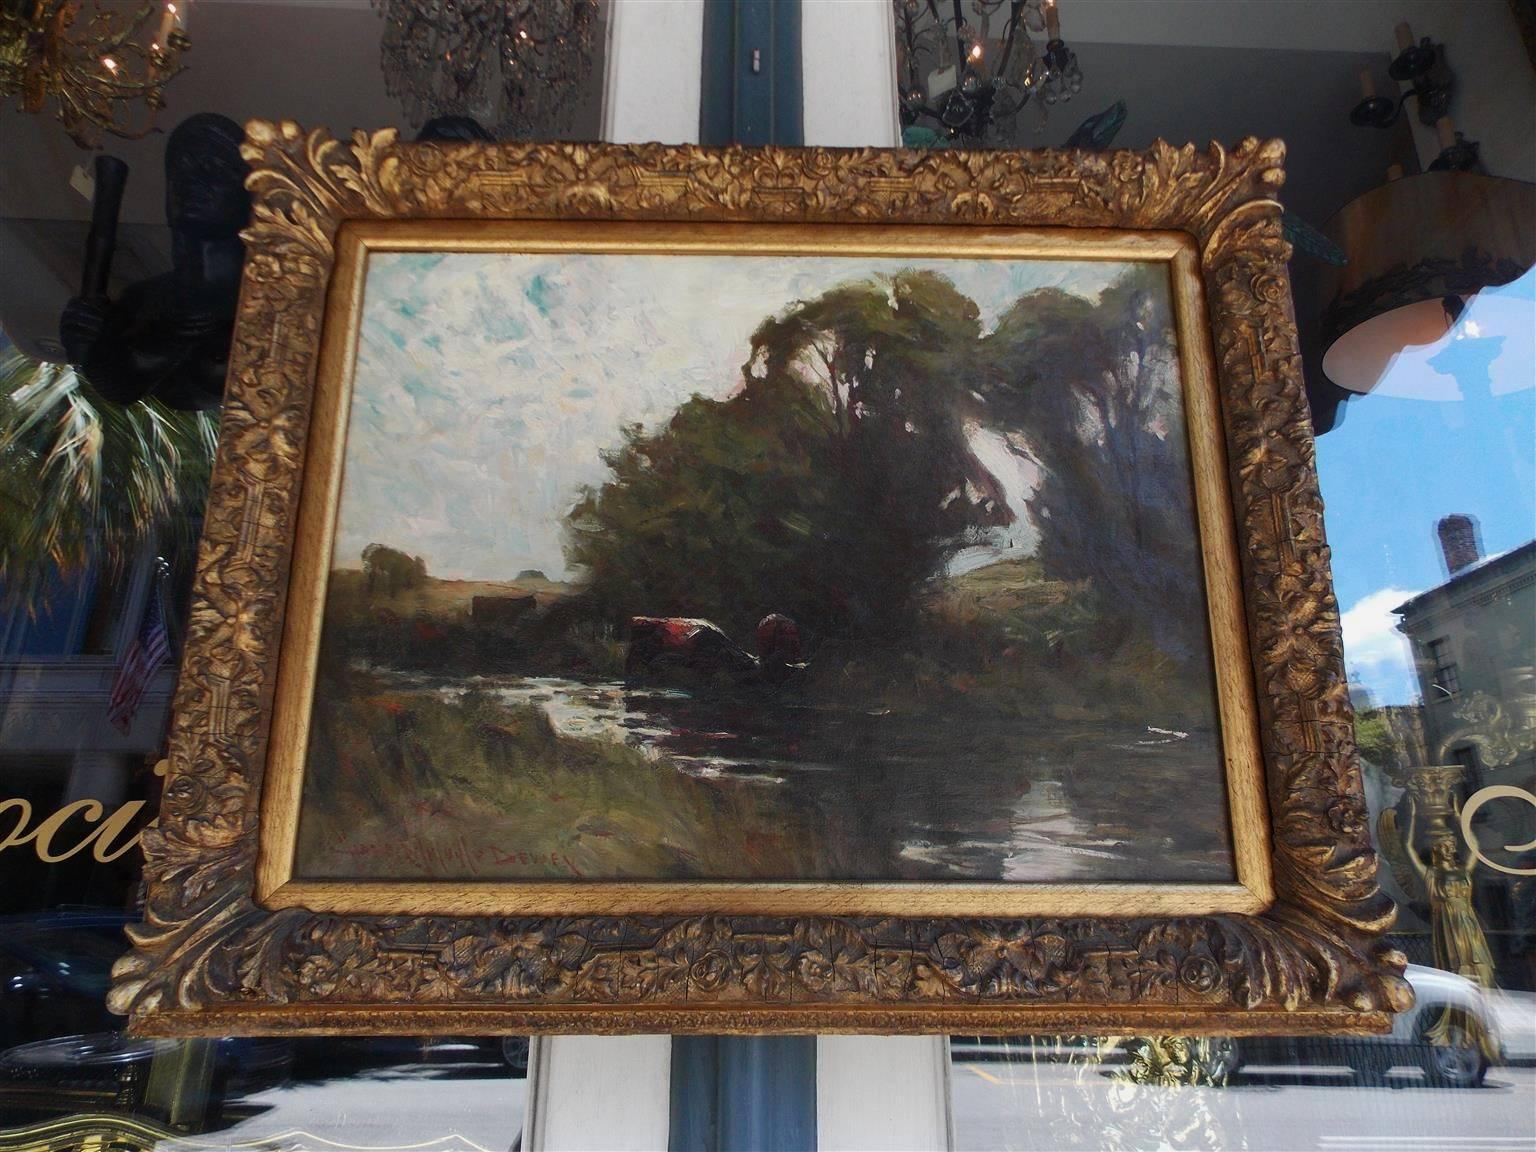 American oil on canvas landscape depicting cows grazing at stream in the original gilt floral frame. Signed lower left corner, Charles Melville Dewey, Late 19th Century.

Charles Melville Dewey was an American tonalist painter. He was born in